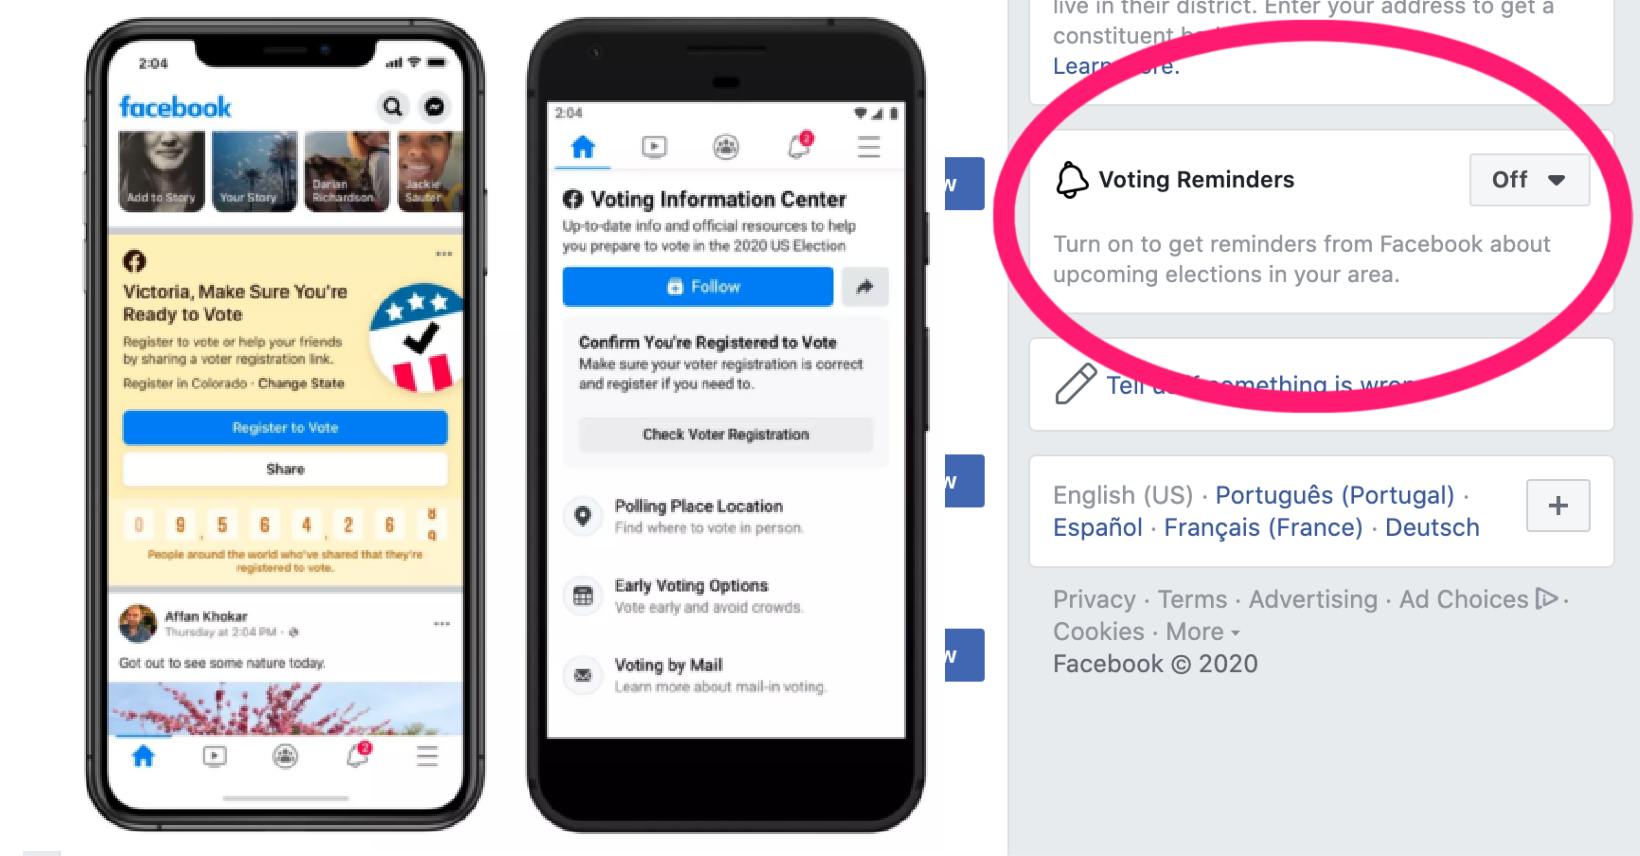 Here’s How You Can Turn Off Those Annoying Voting Reminders on Facebook